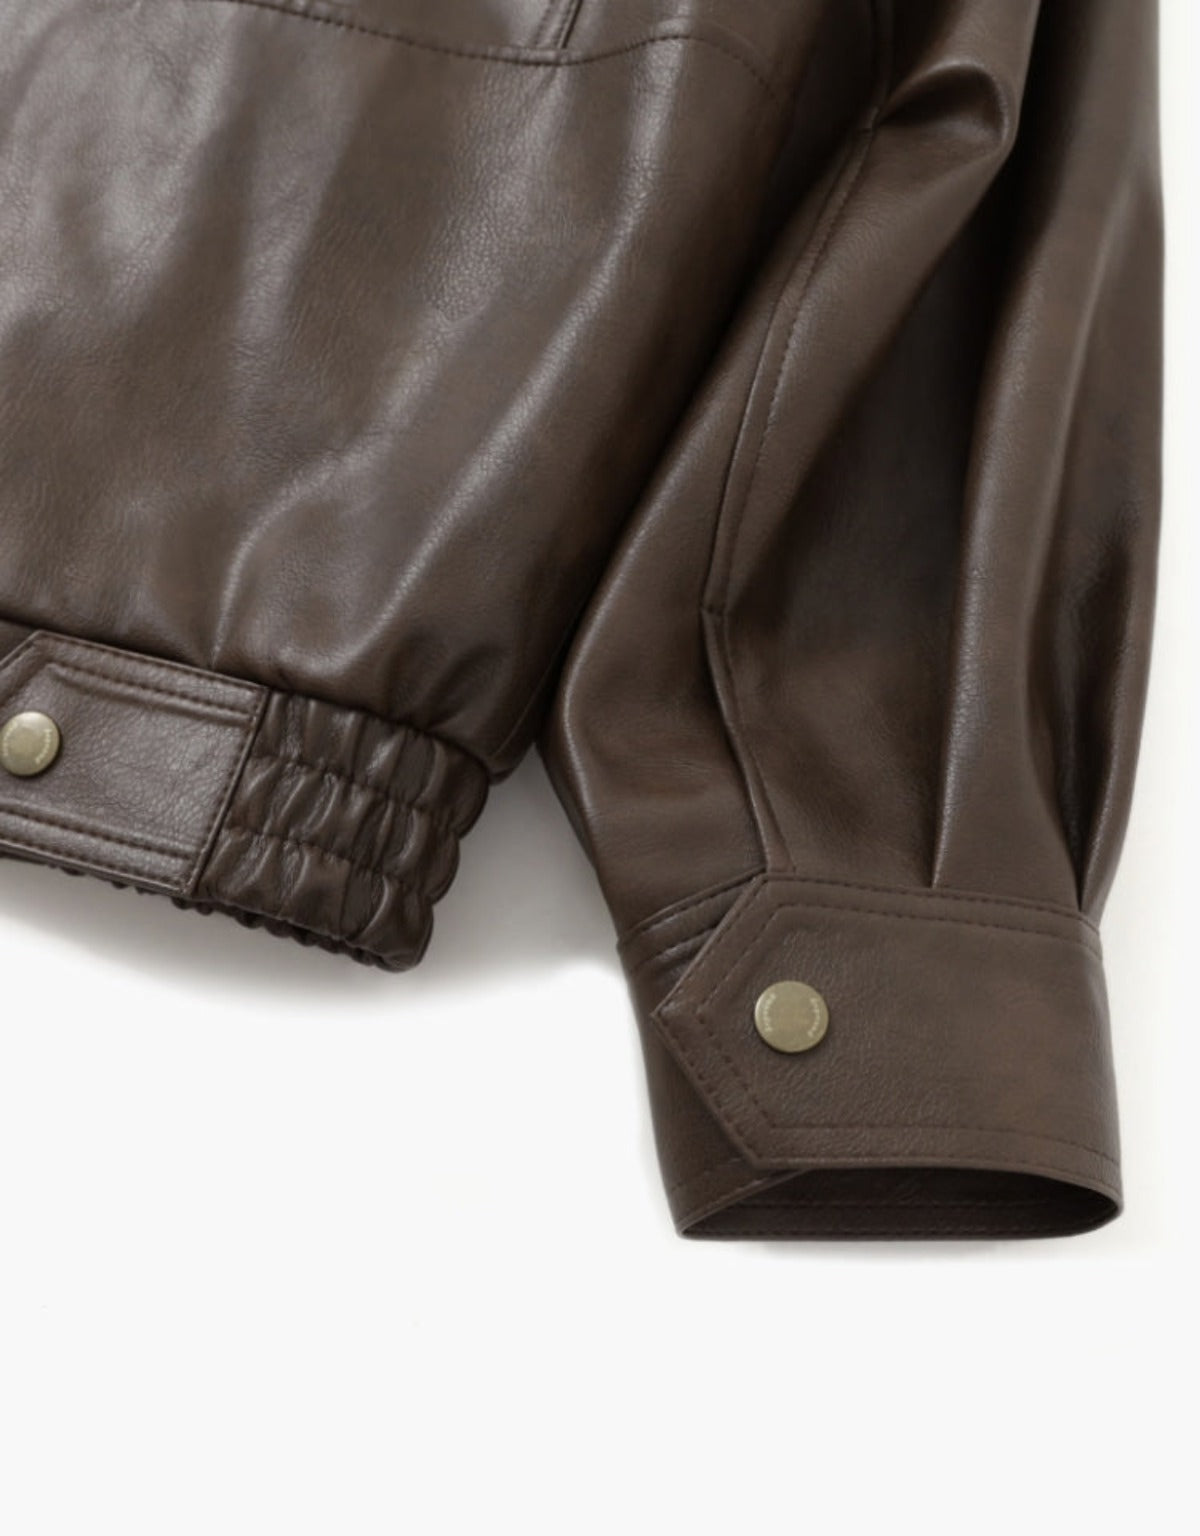 Leather Jacket In Brown